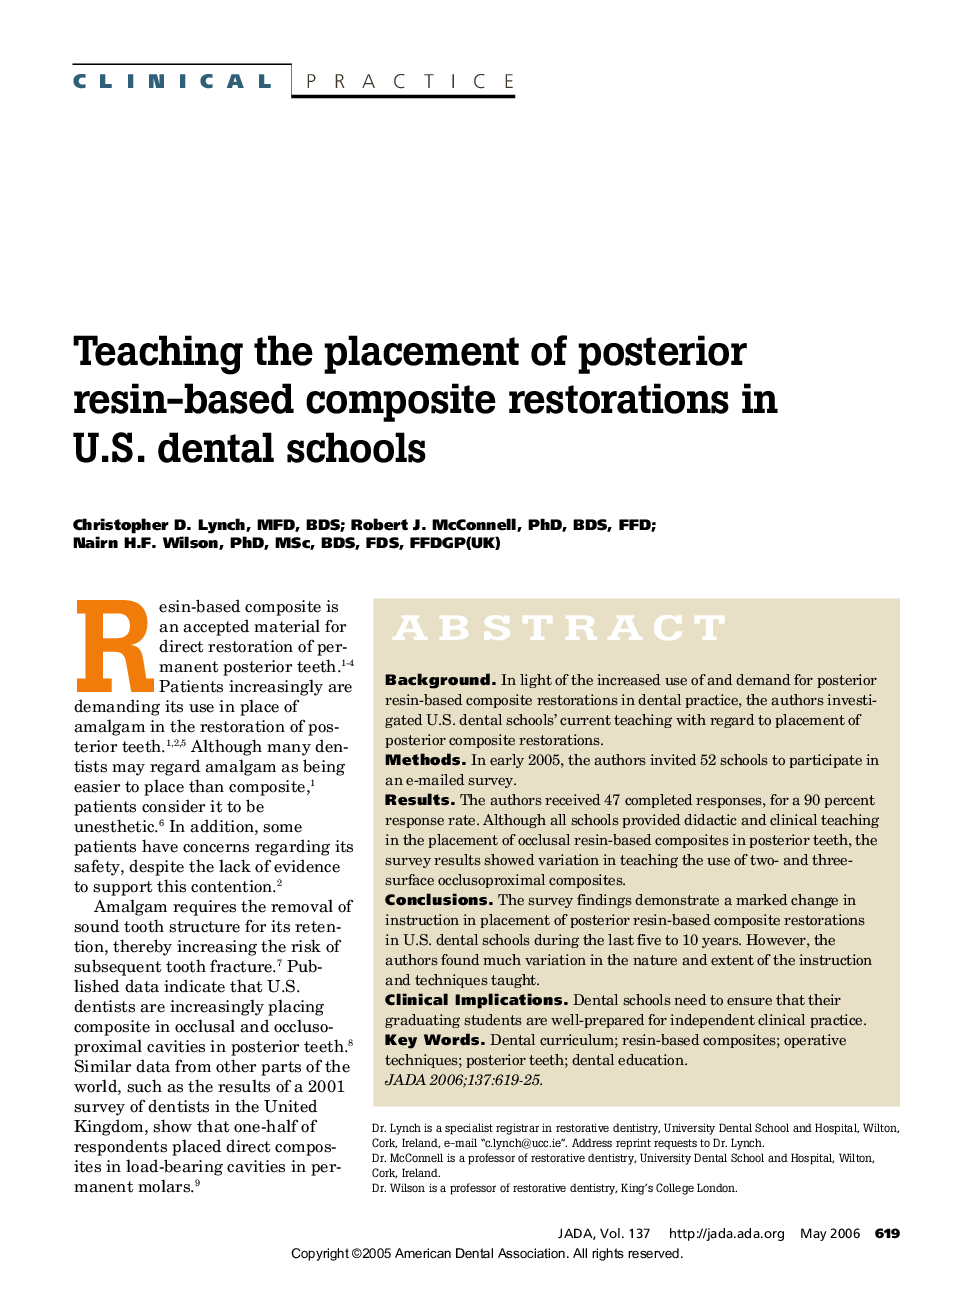 Teaching the placement of posterior resin-based composite restorations in U.S. dental schools